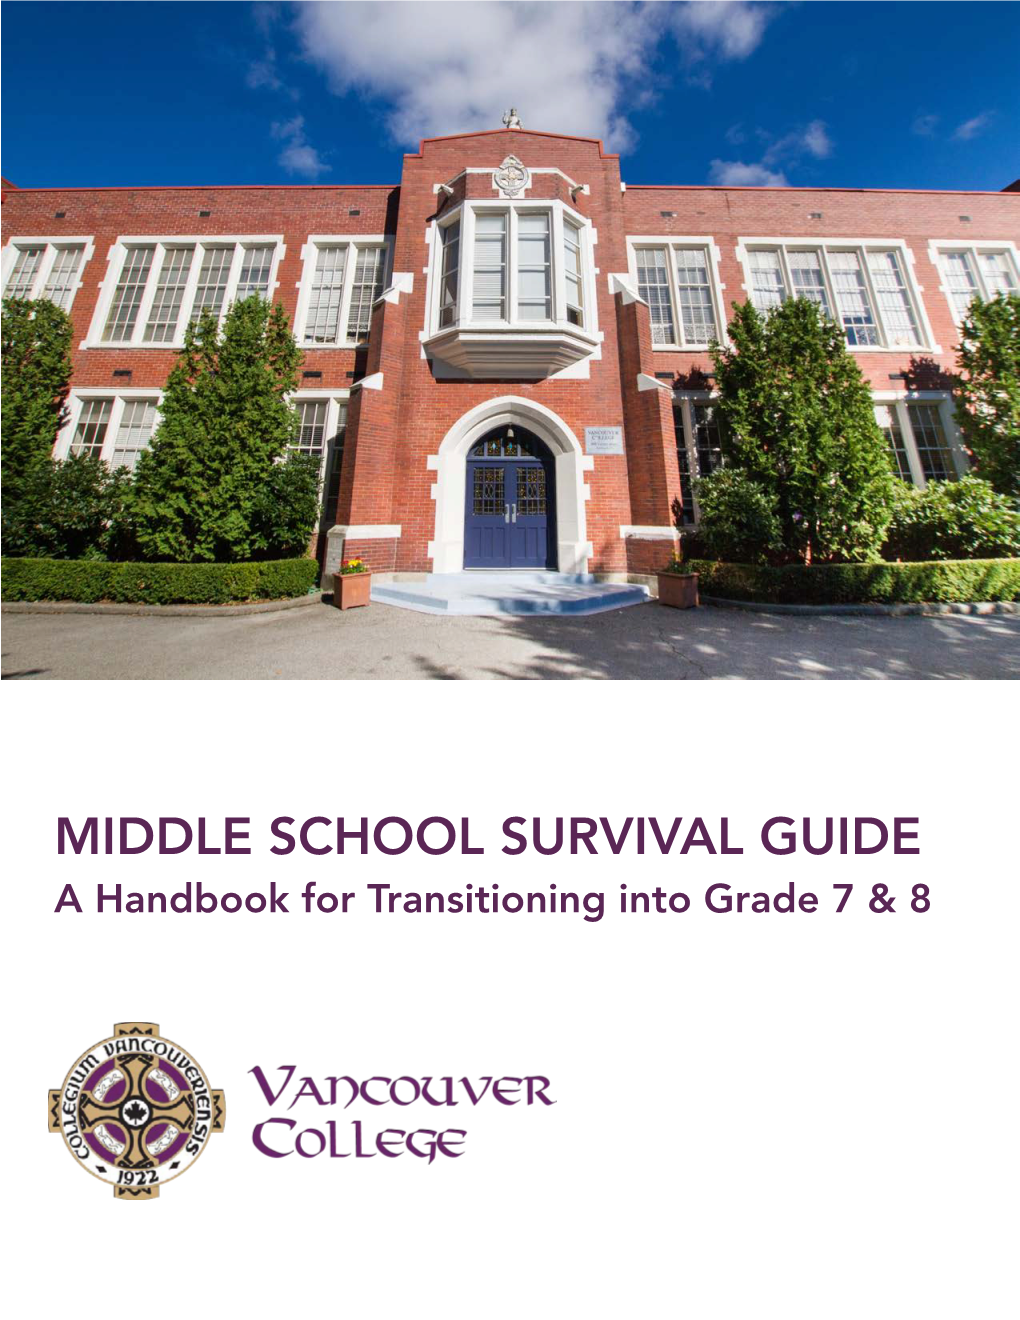 MIDDLE SCHOOL SURVIVAL GUIDE a Handbook for Transitioning Into Grade 7 & 8